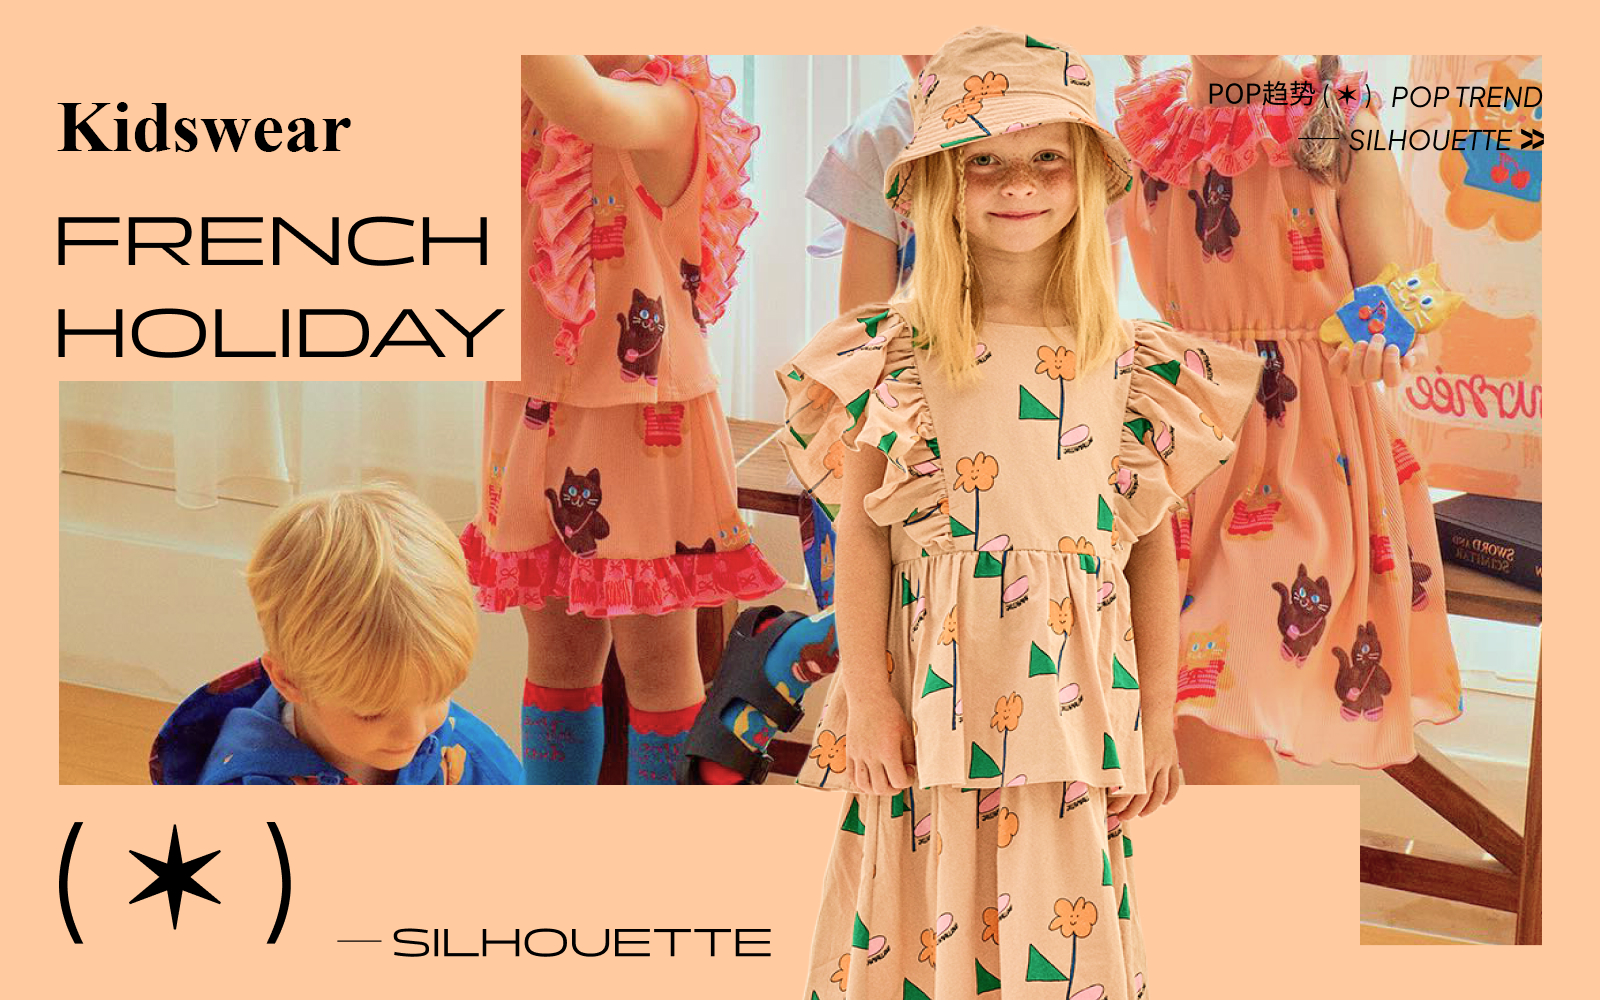 French Vacation -- The Silhouette Trend for Kidswear